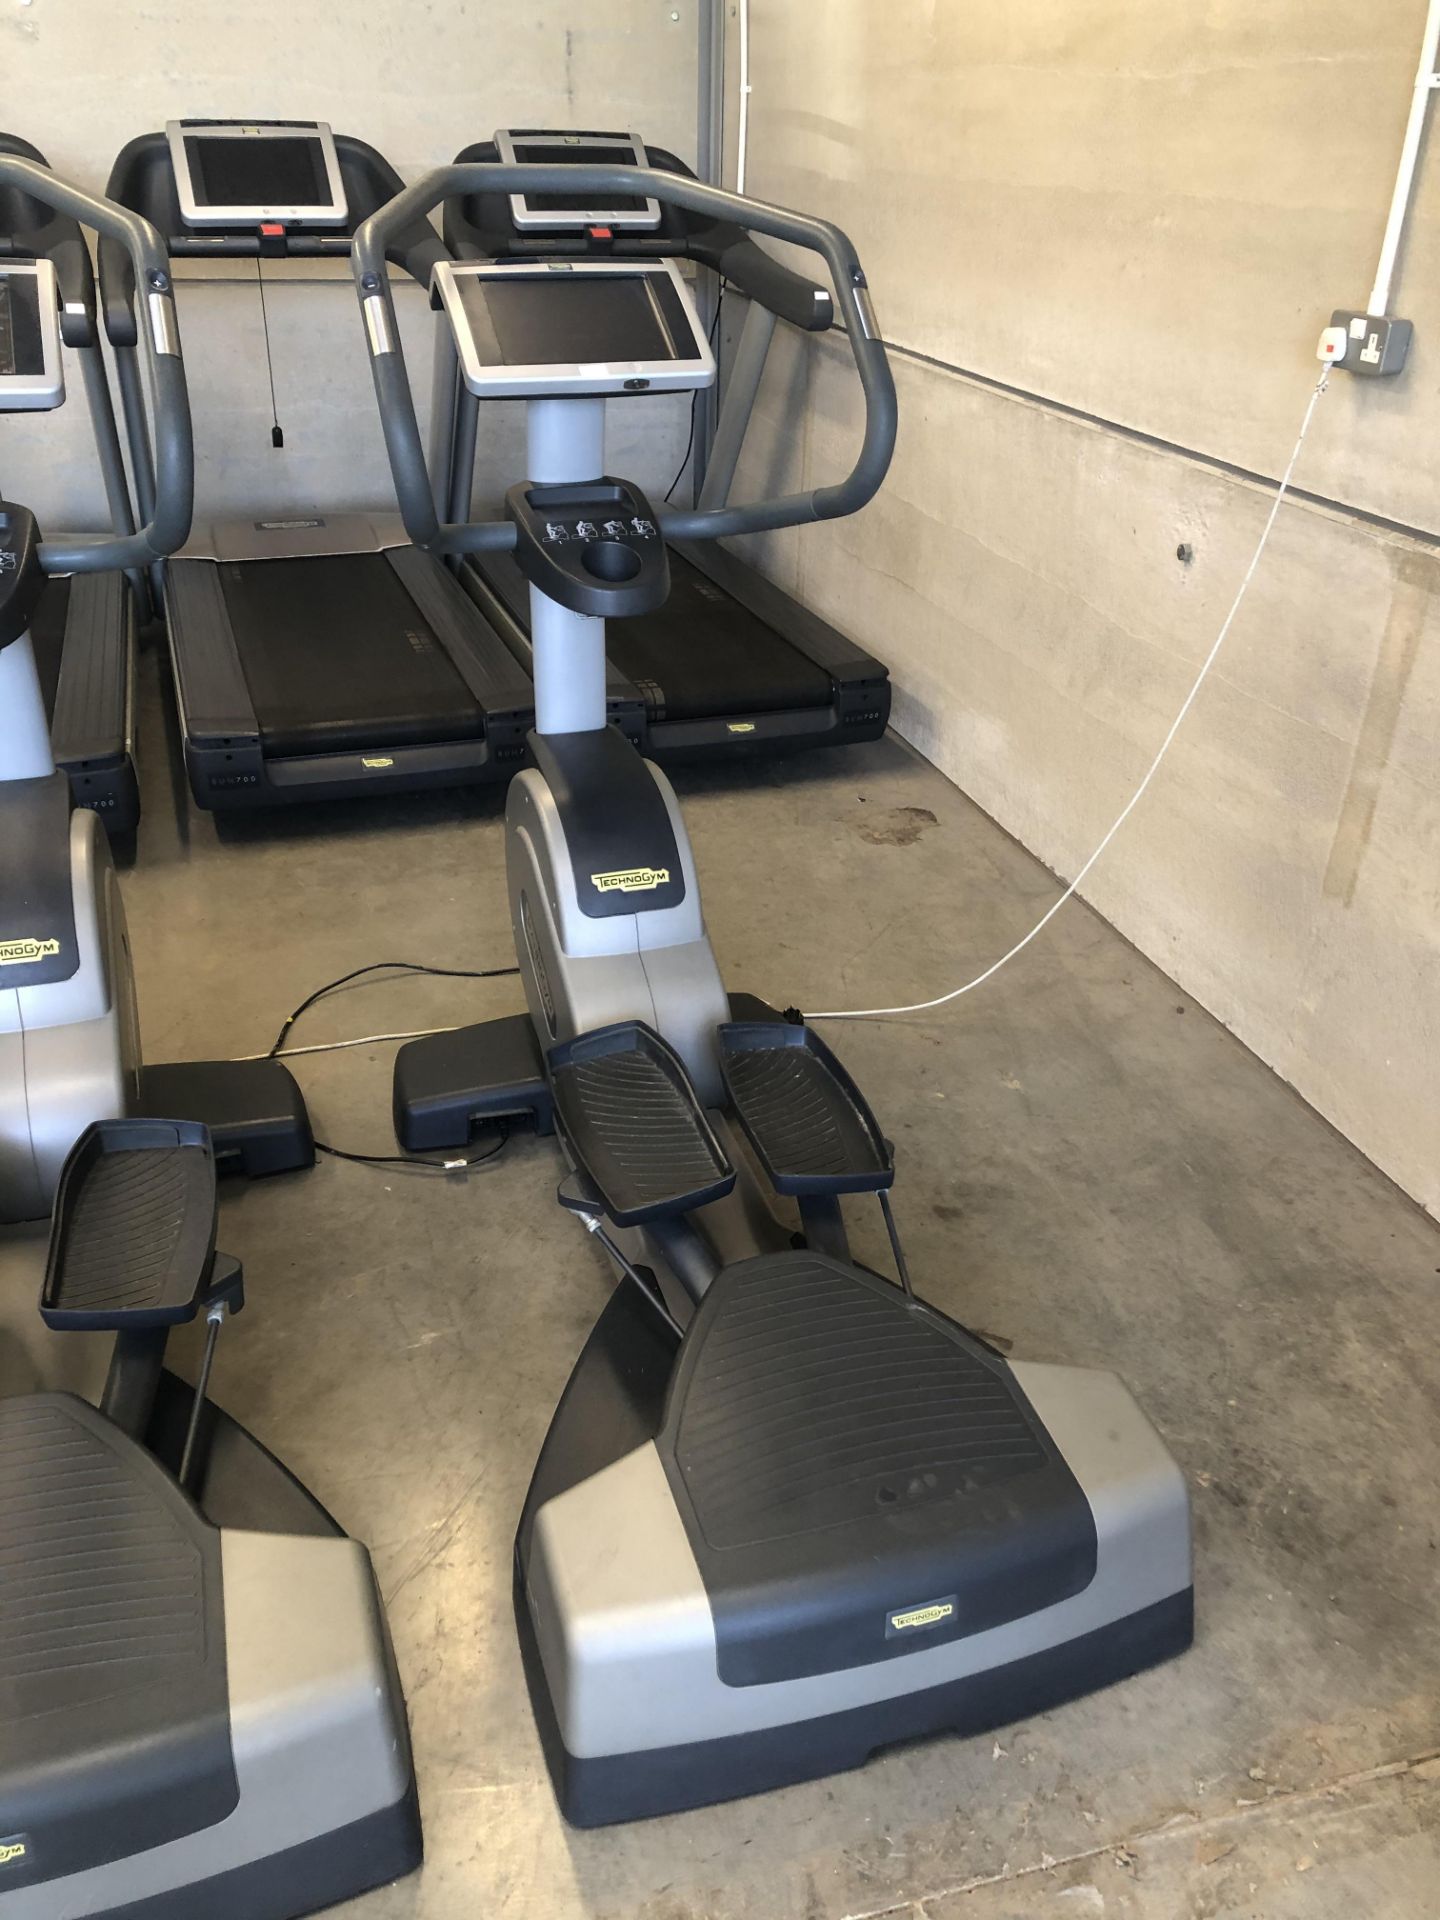 *Technogym 700 Series Wave Excite Cross Trainer with Touchscreen TV